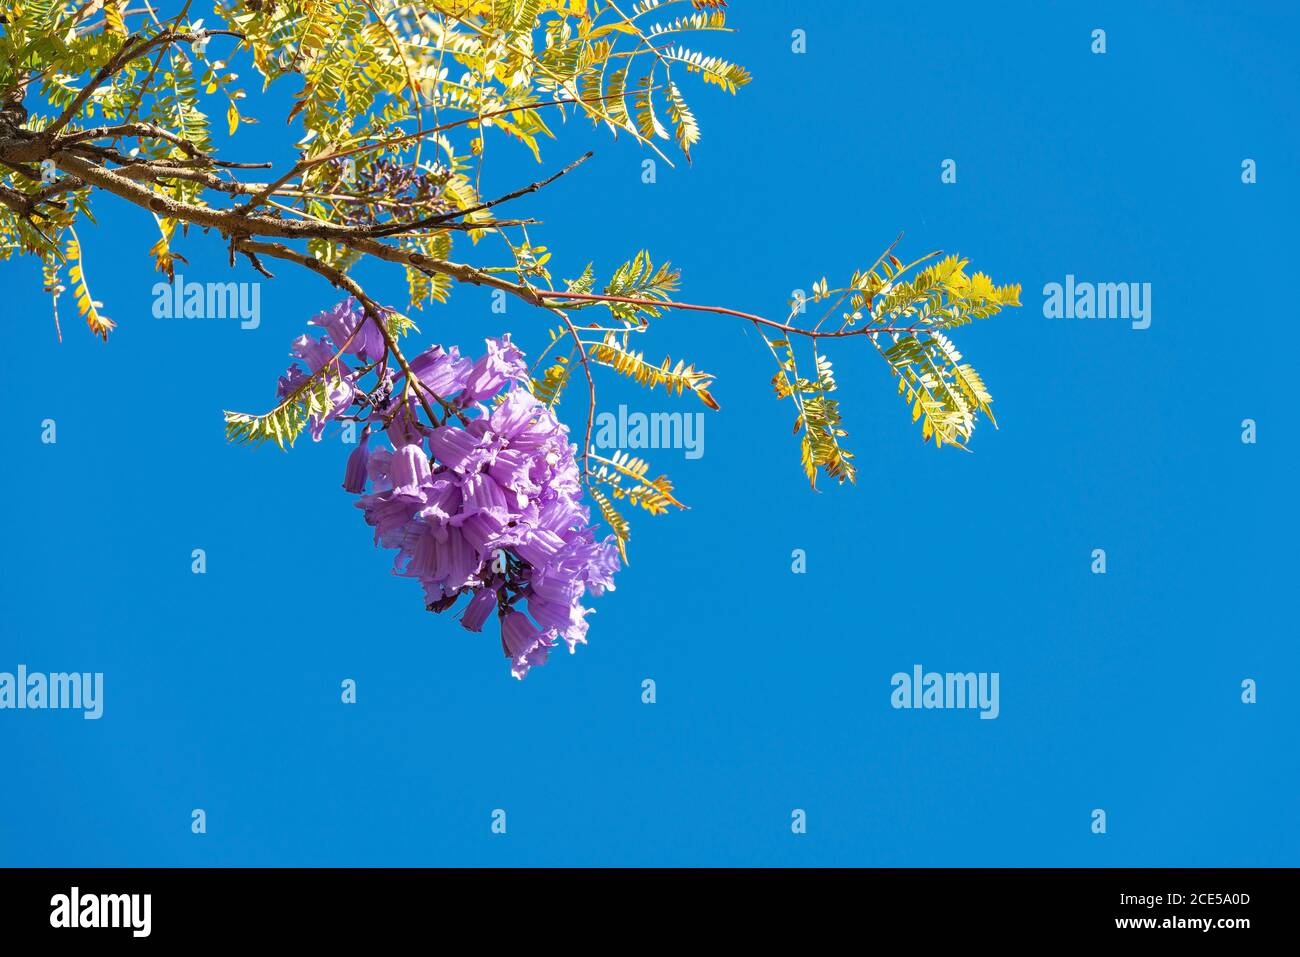 Jacaranda tree of the Bignoniaceae family in bloom with its purple flowers, concept of spring and floral season with copy space. Stock Photo